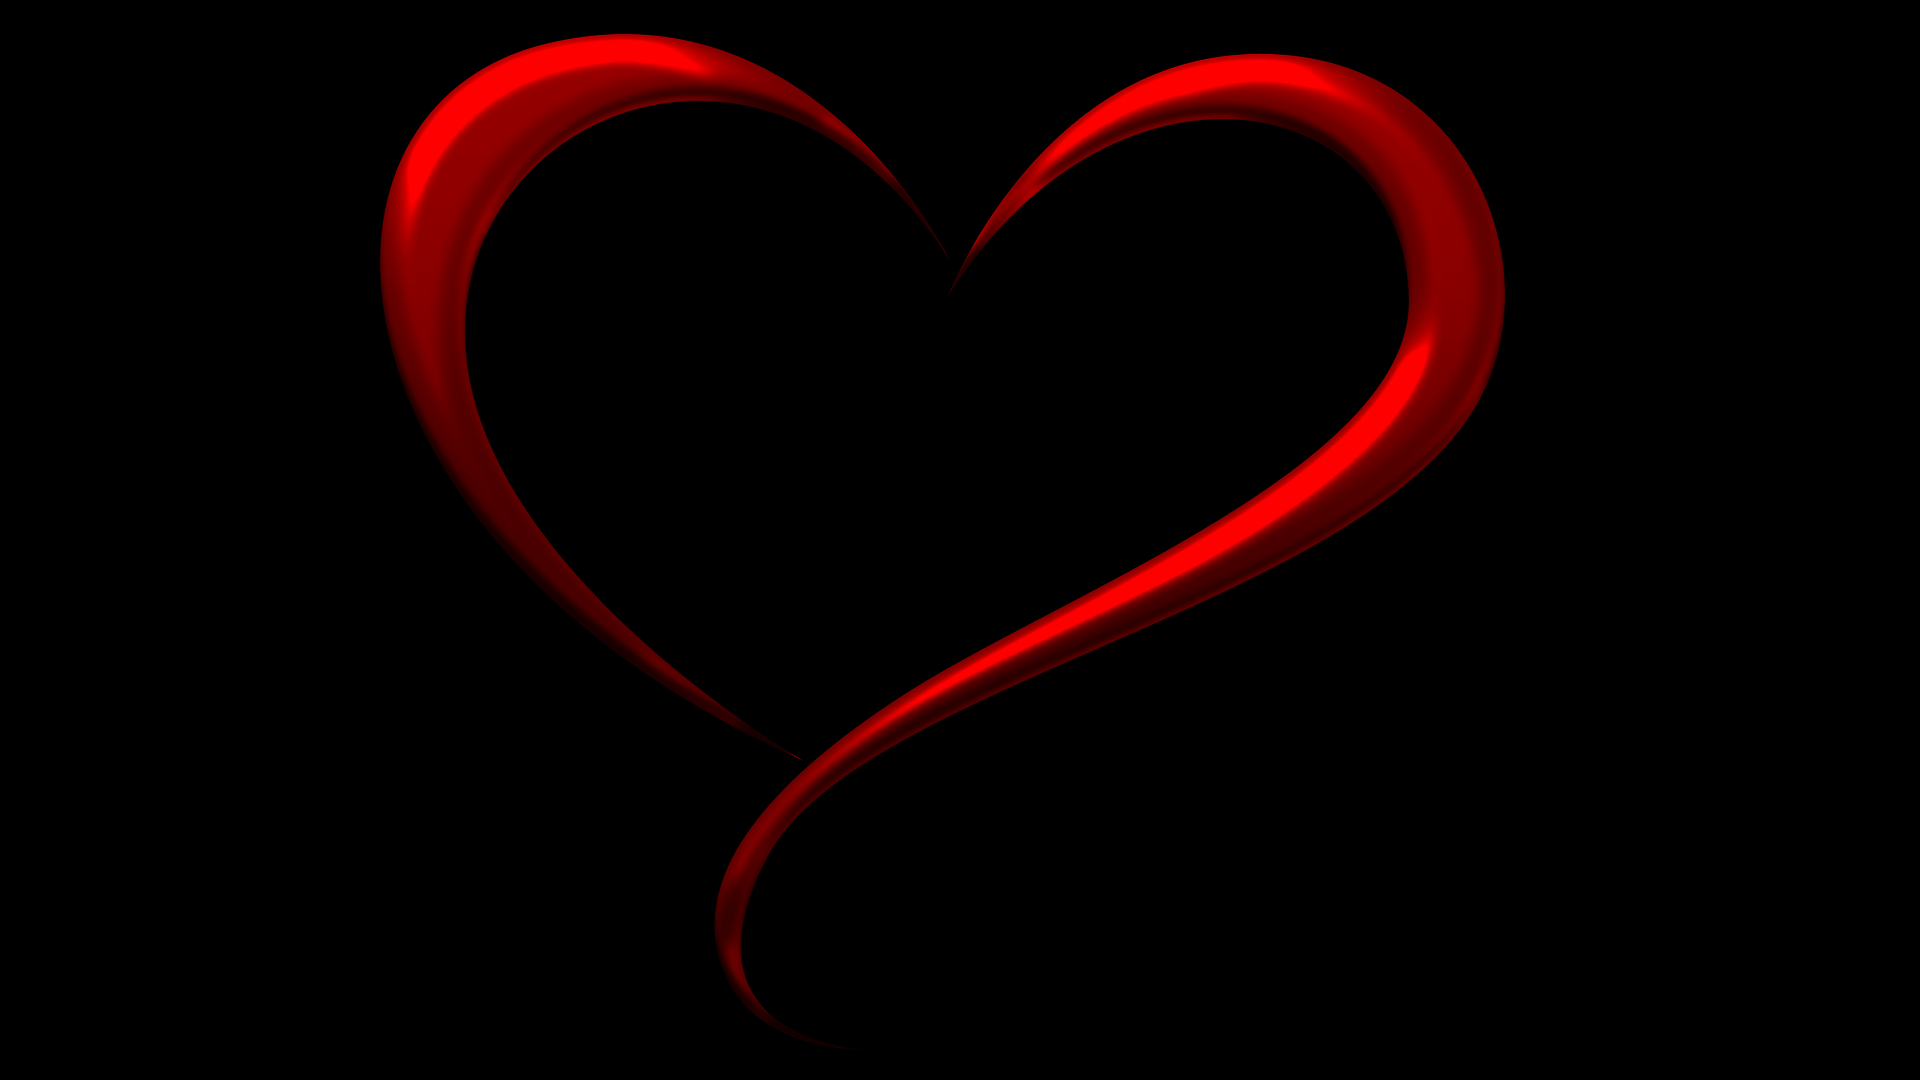 1920x1080 Simple Red Heart Background Hd Wallpaper Background Image 1920x1080